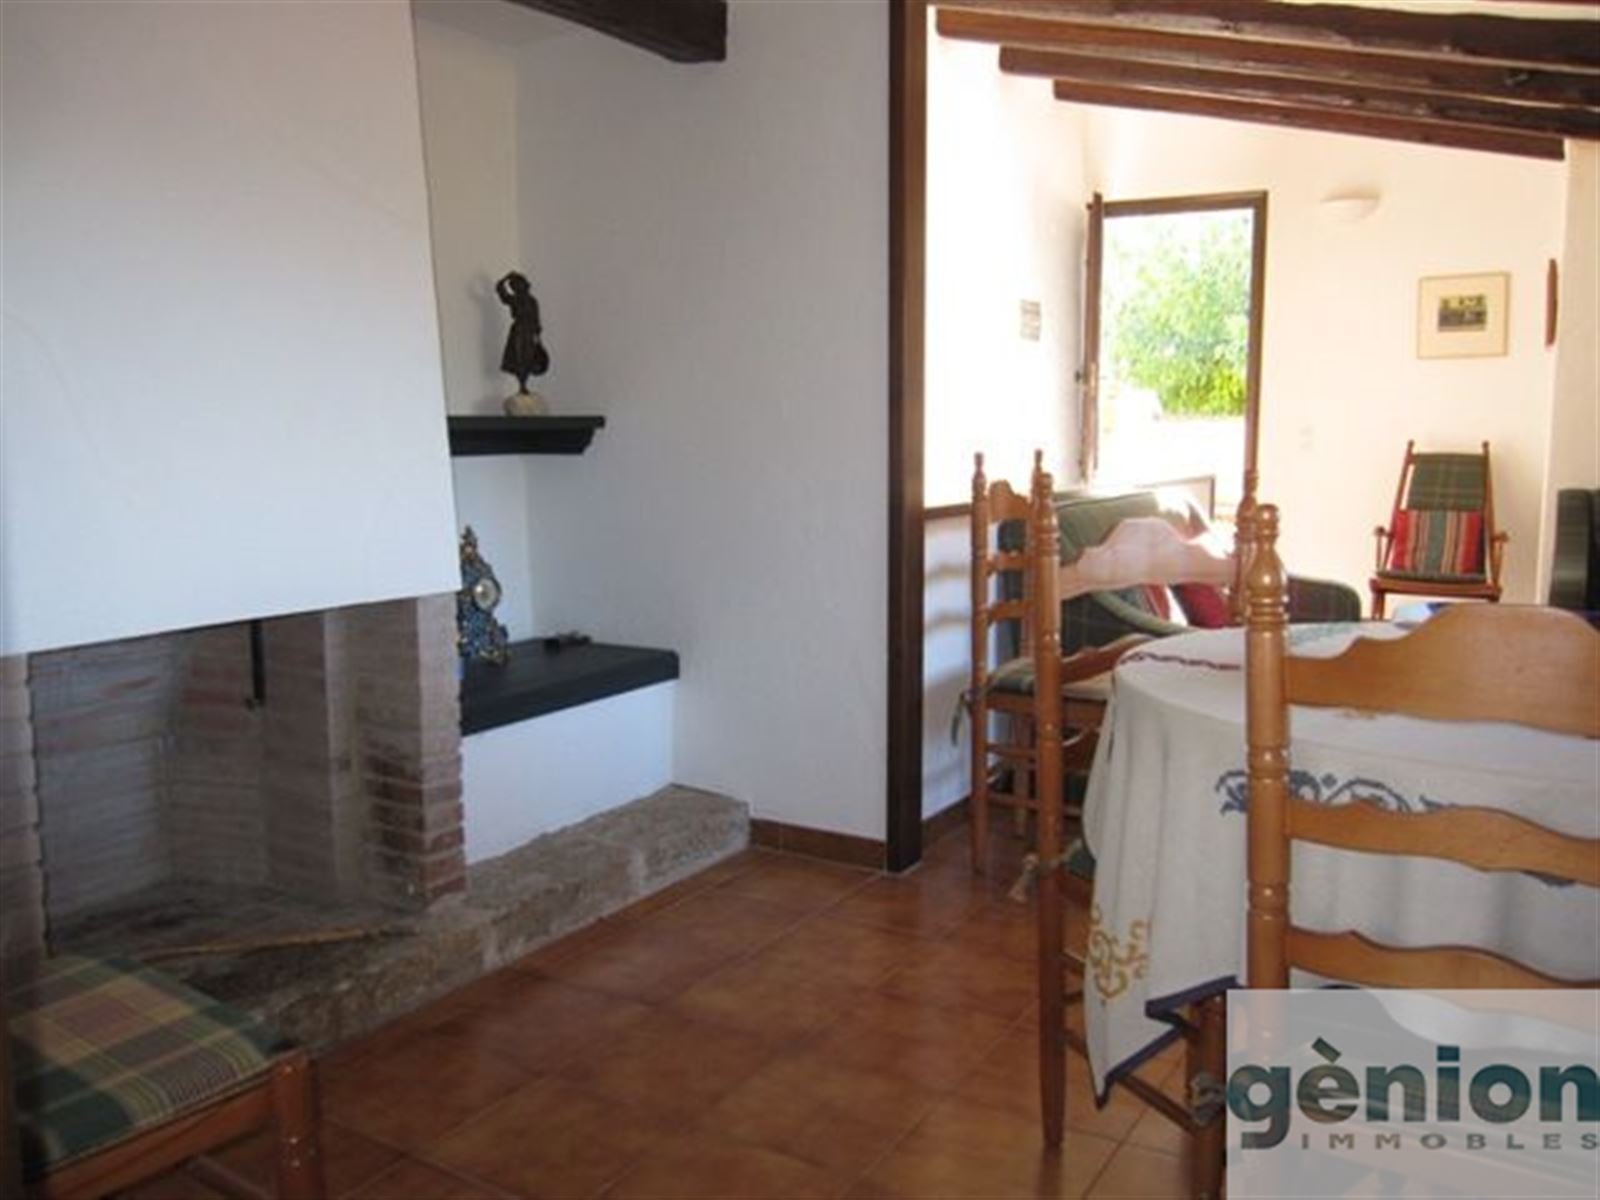 FARMHOUSE IN CANET D’ADRI, BESIDE GIRONA. 550M² BUILT AND 1,93HA OF LAND